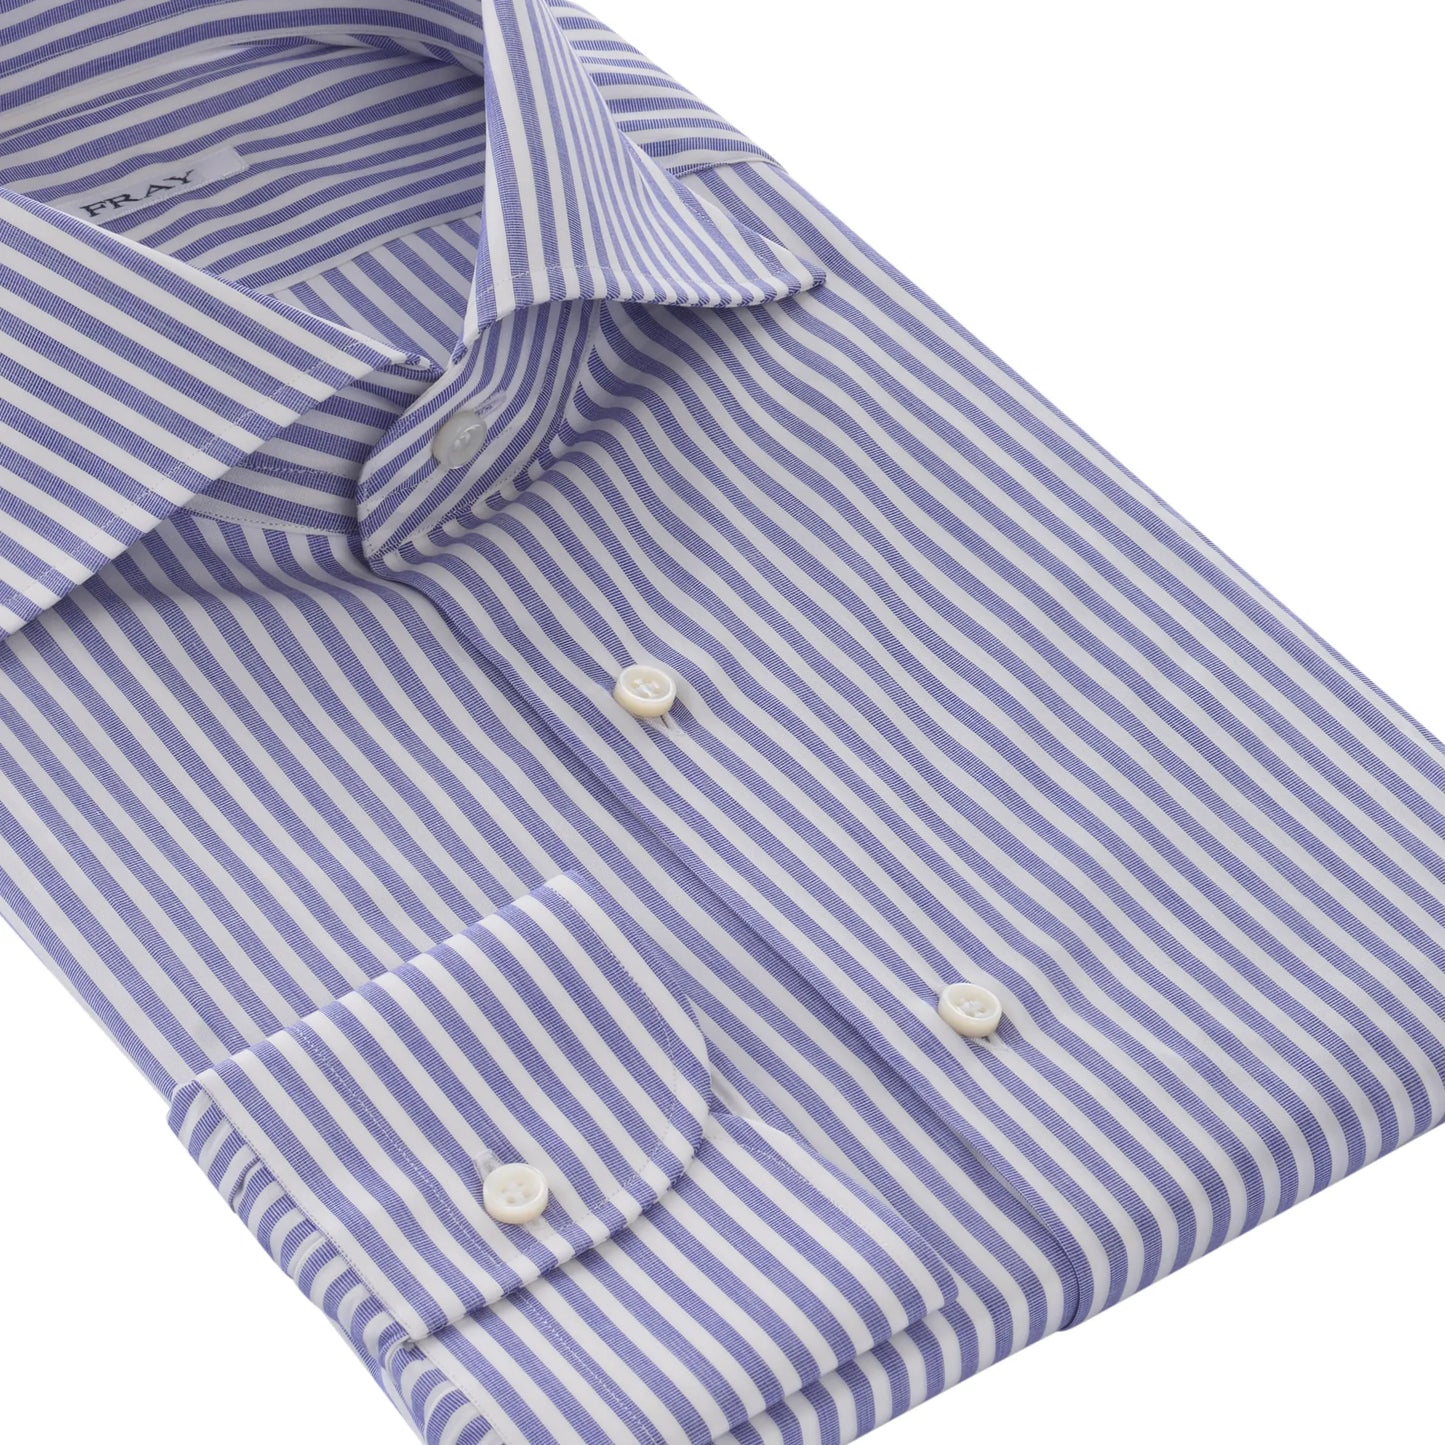 Striped Blue and White Shirt with Spread Collar